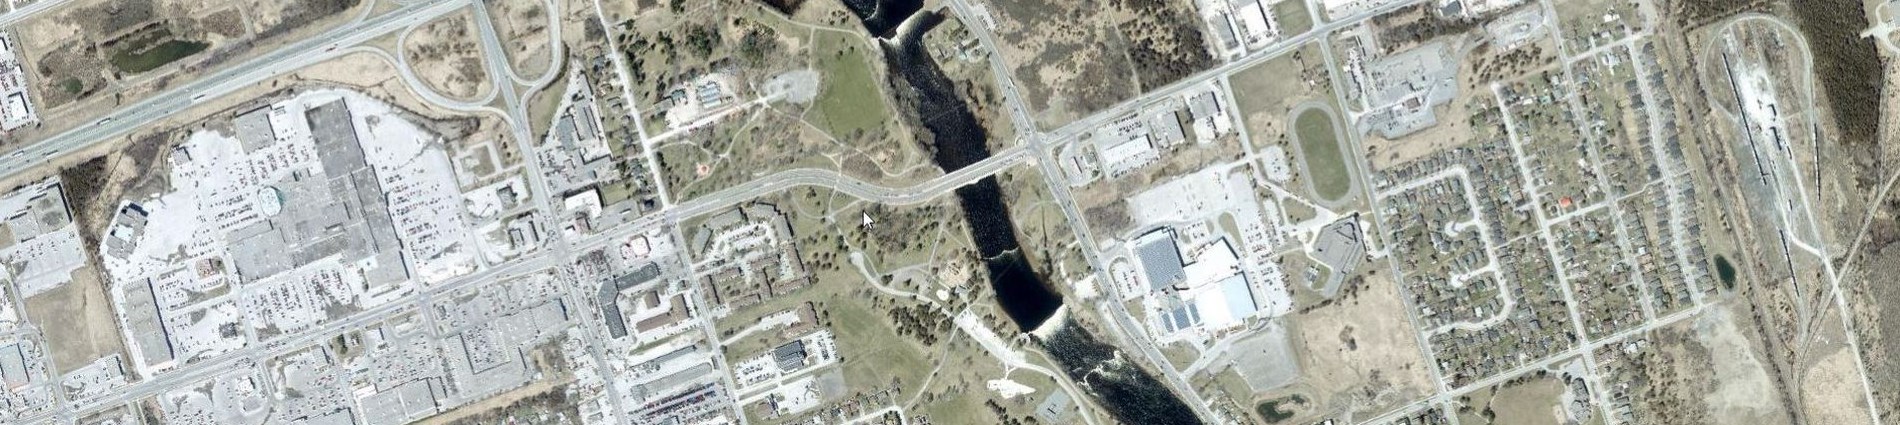 Aerial Image of the Quinte Mall and Quinte Sports and Wellness Centre Area